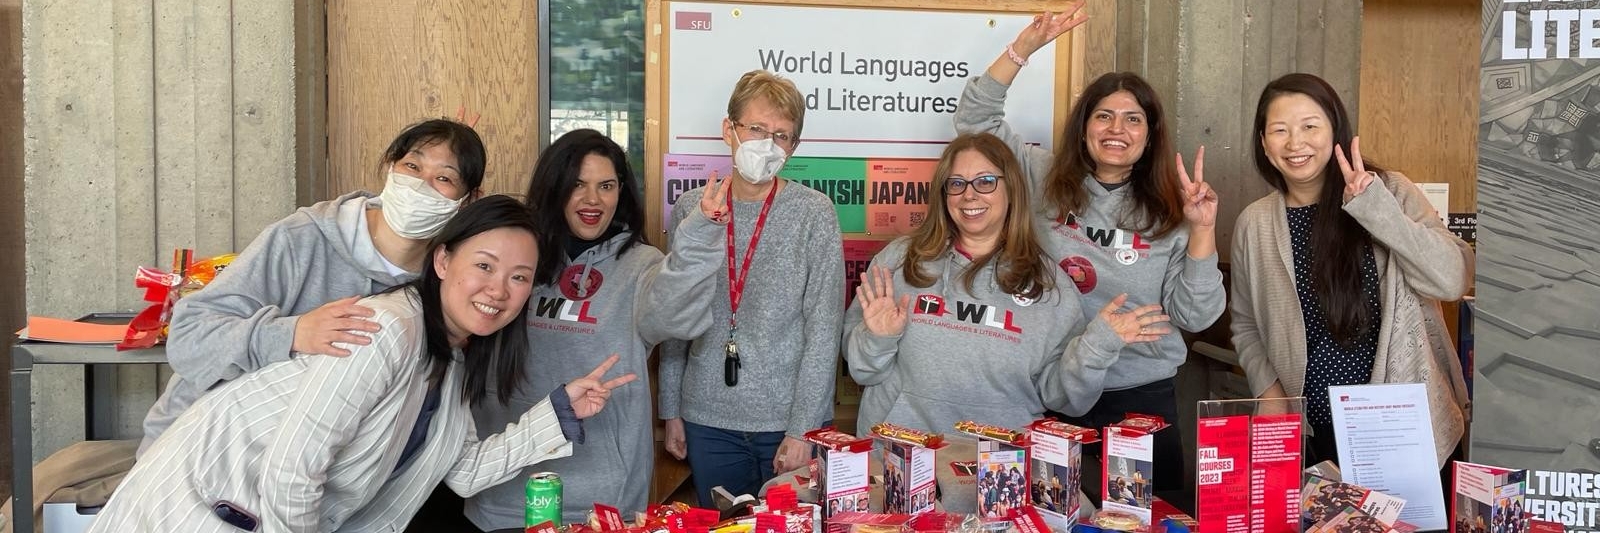 Welcome to SFU's Department of World Languages and Literatures